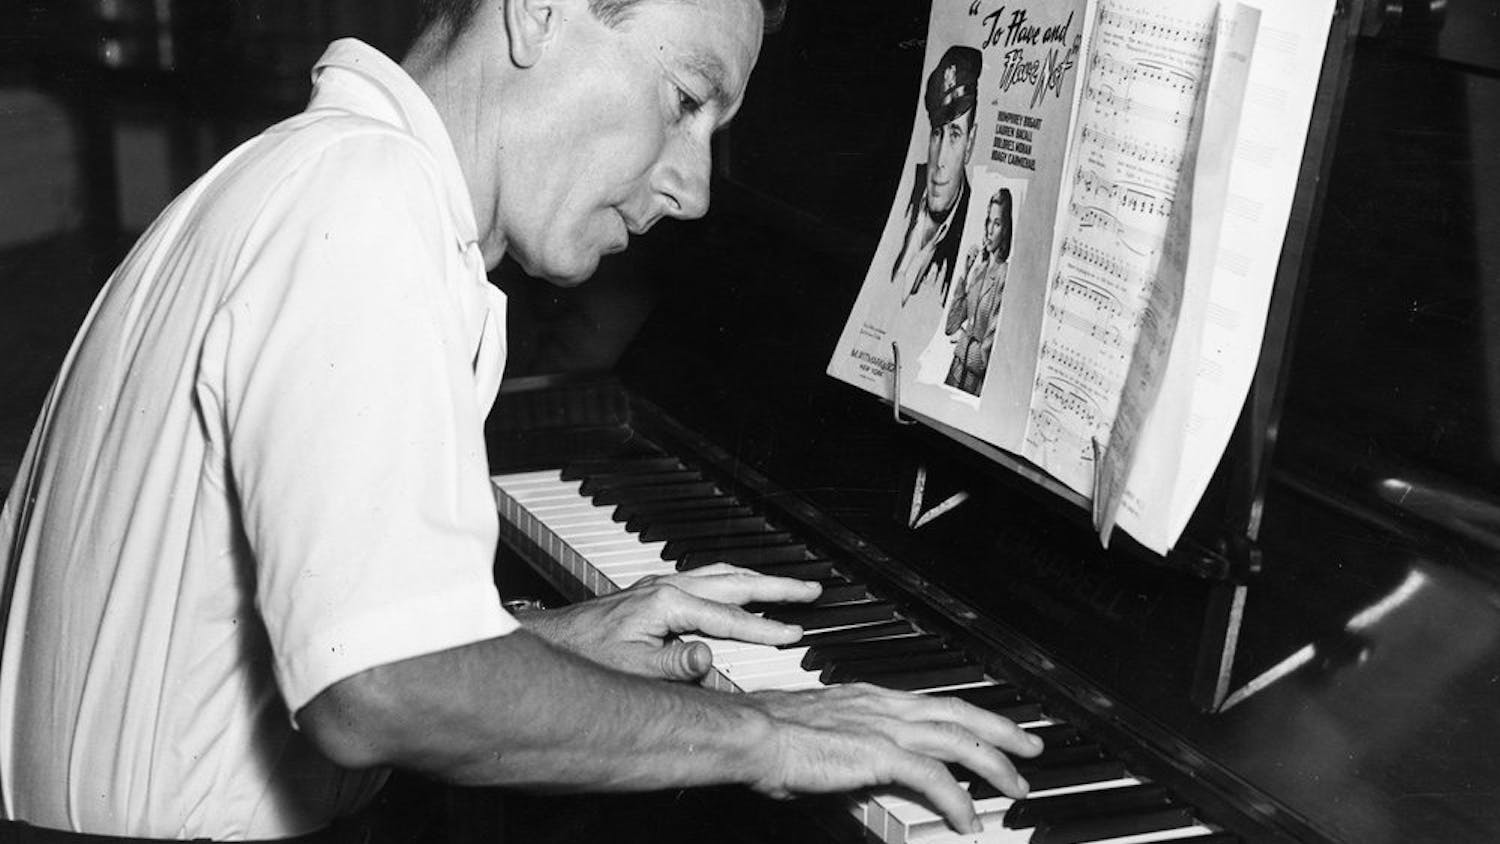 Hoagy Carmichael's birthday is Nov. 22. To honor it, WFHB is having a fundraising event on Nov. 16 which will showcase local musicians interpreting Carmichael's music.